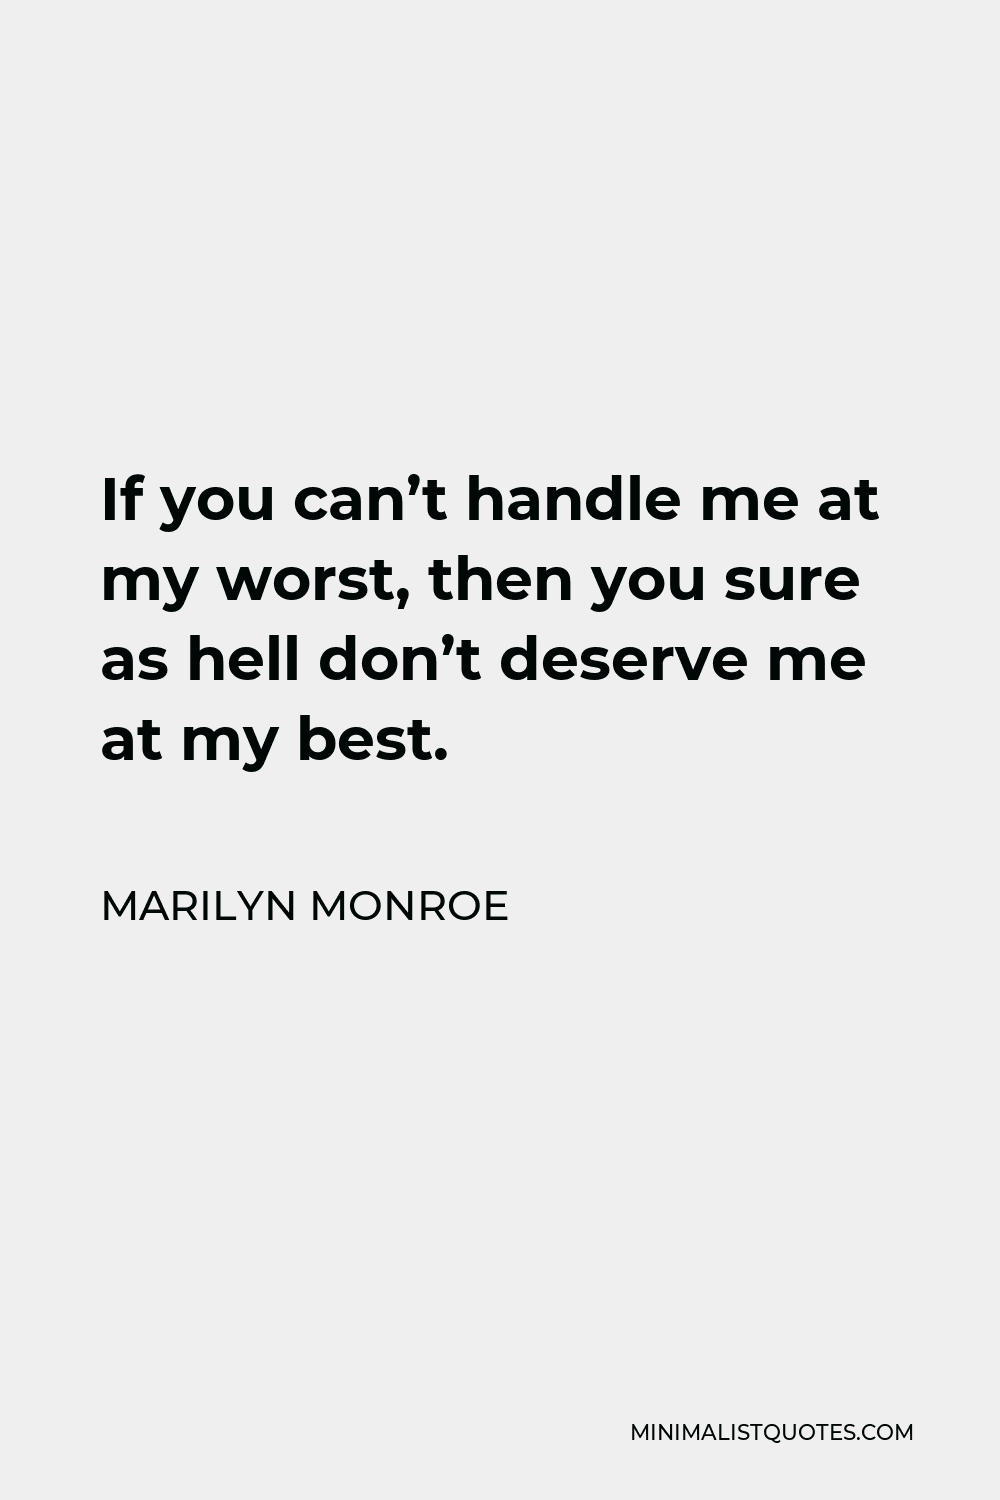 Marilyn Monroe Quote - If you can’t handle me at my worst, then you sure as hell don’t deserve me at my best.